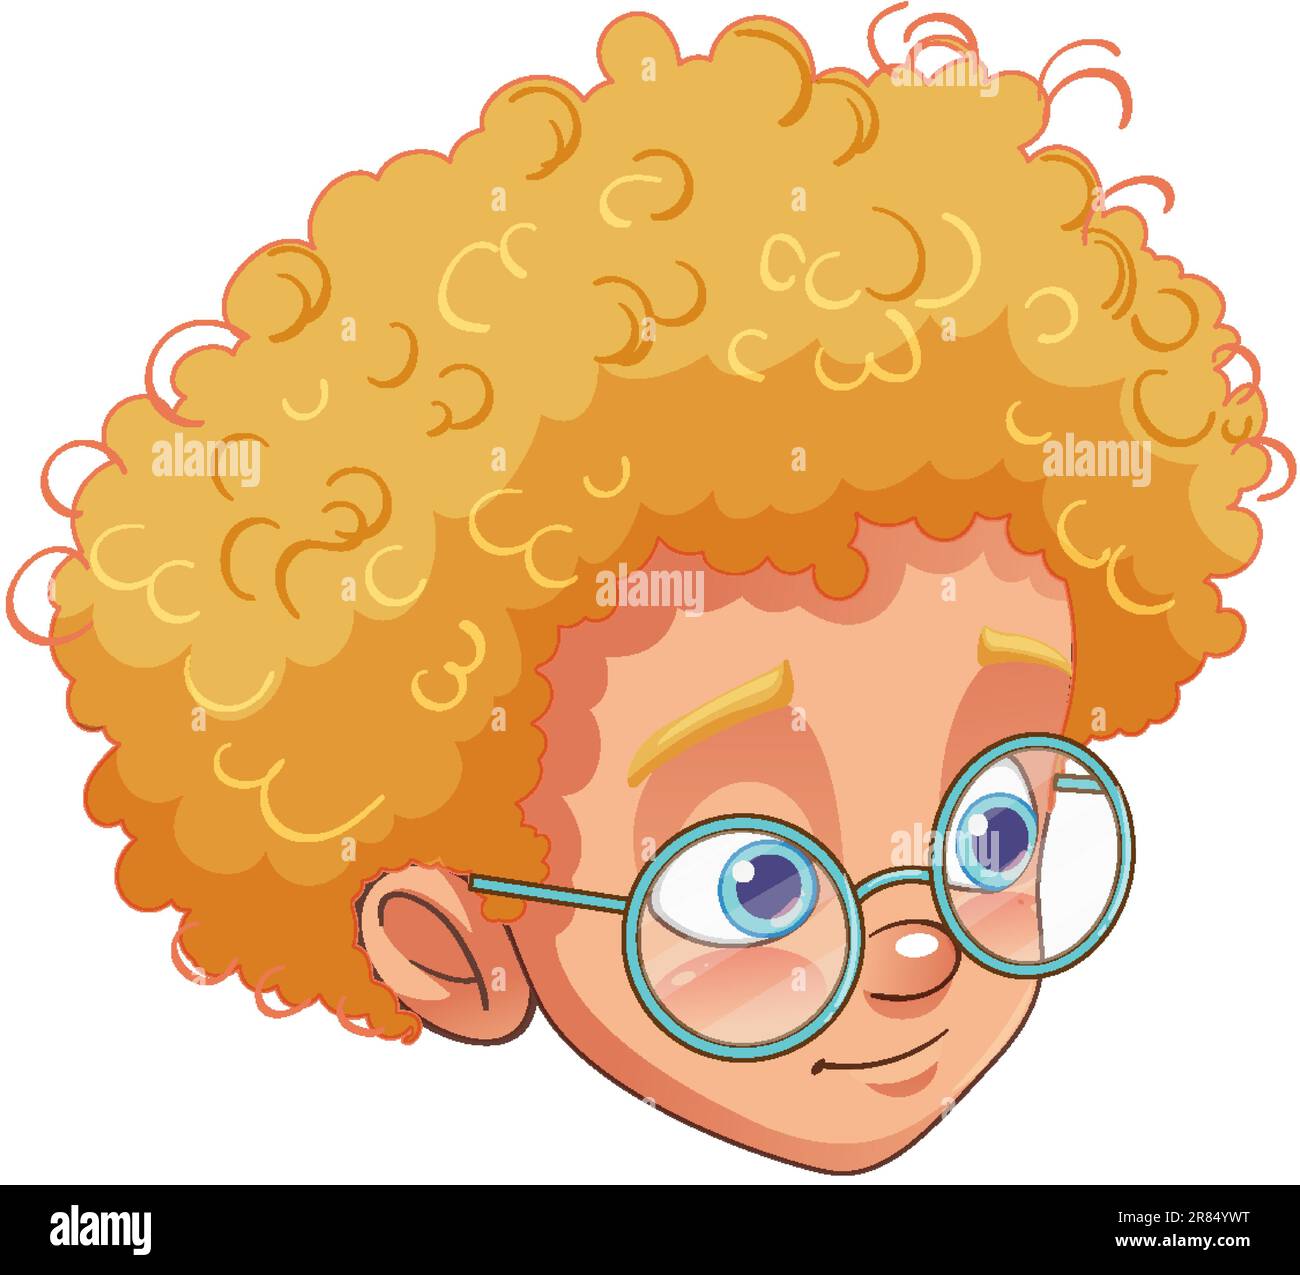 Cute curly hair boy wearing glasses head illustration Stock Vector